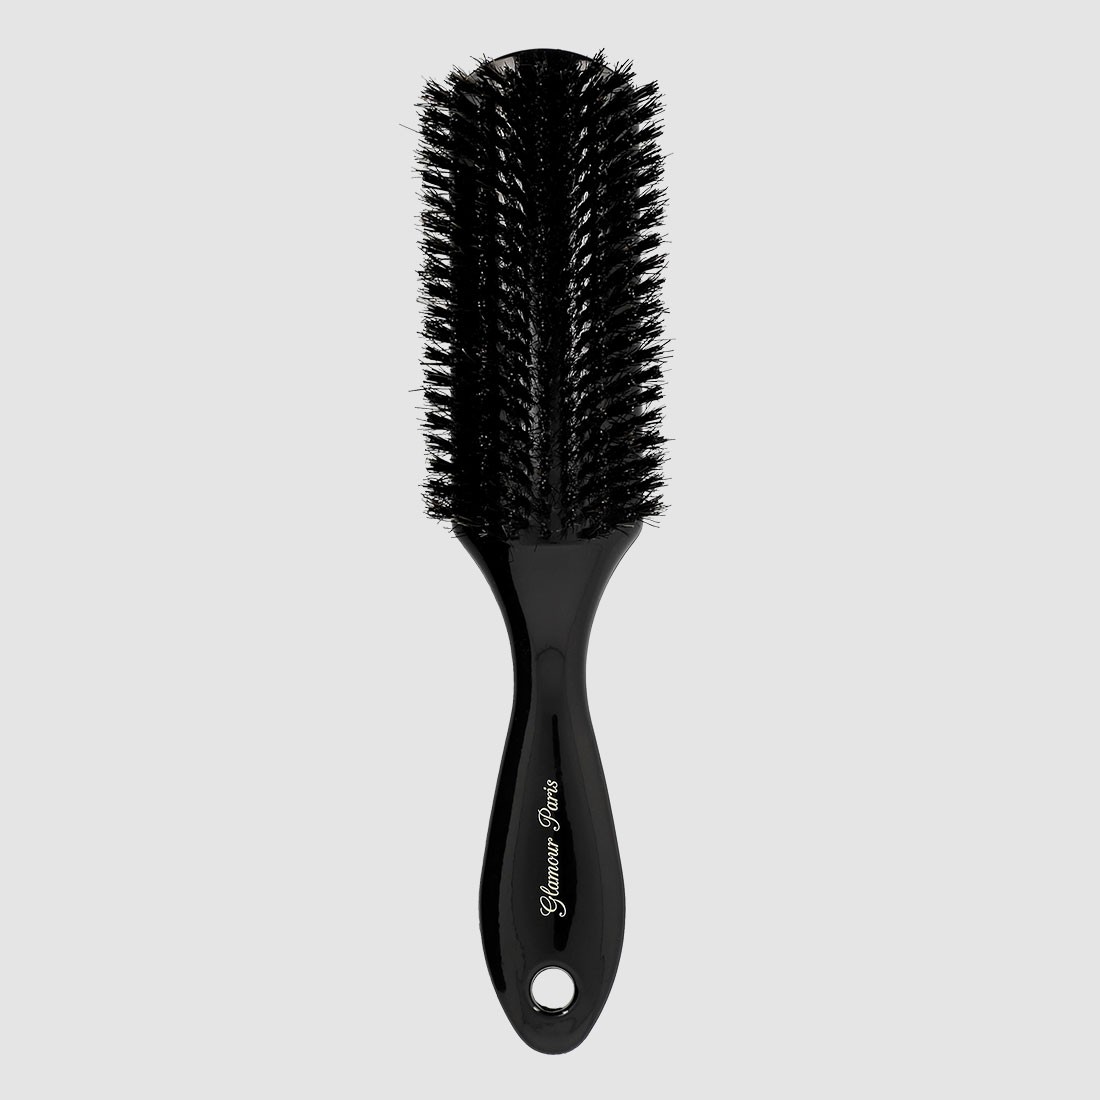 Brosse à cheveux plate - Glamour